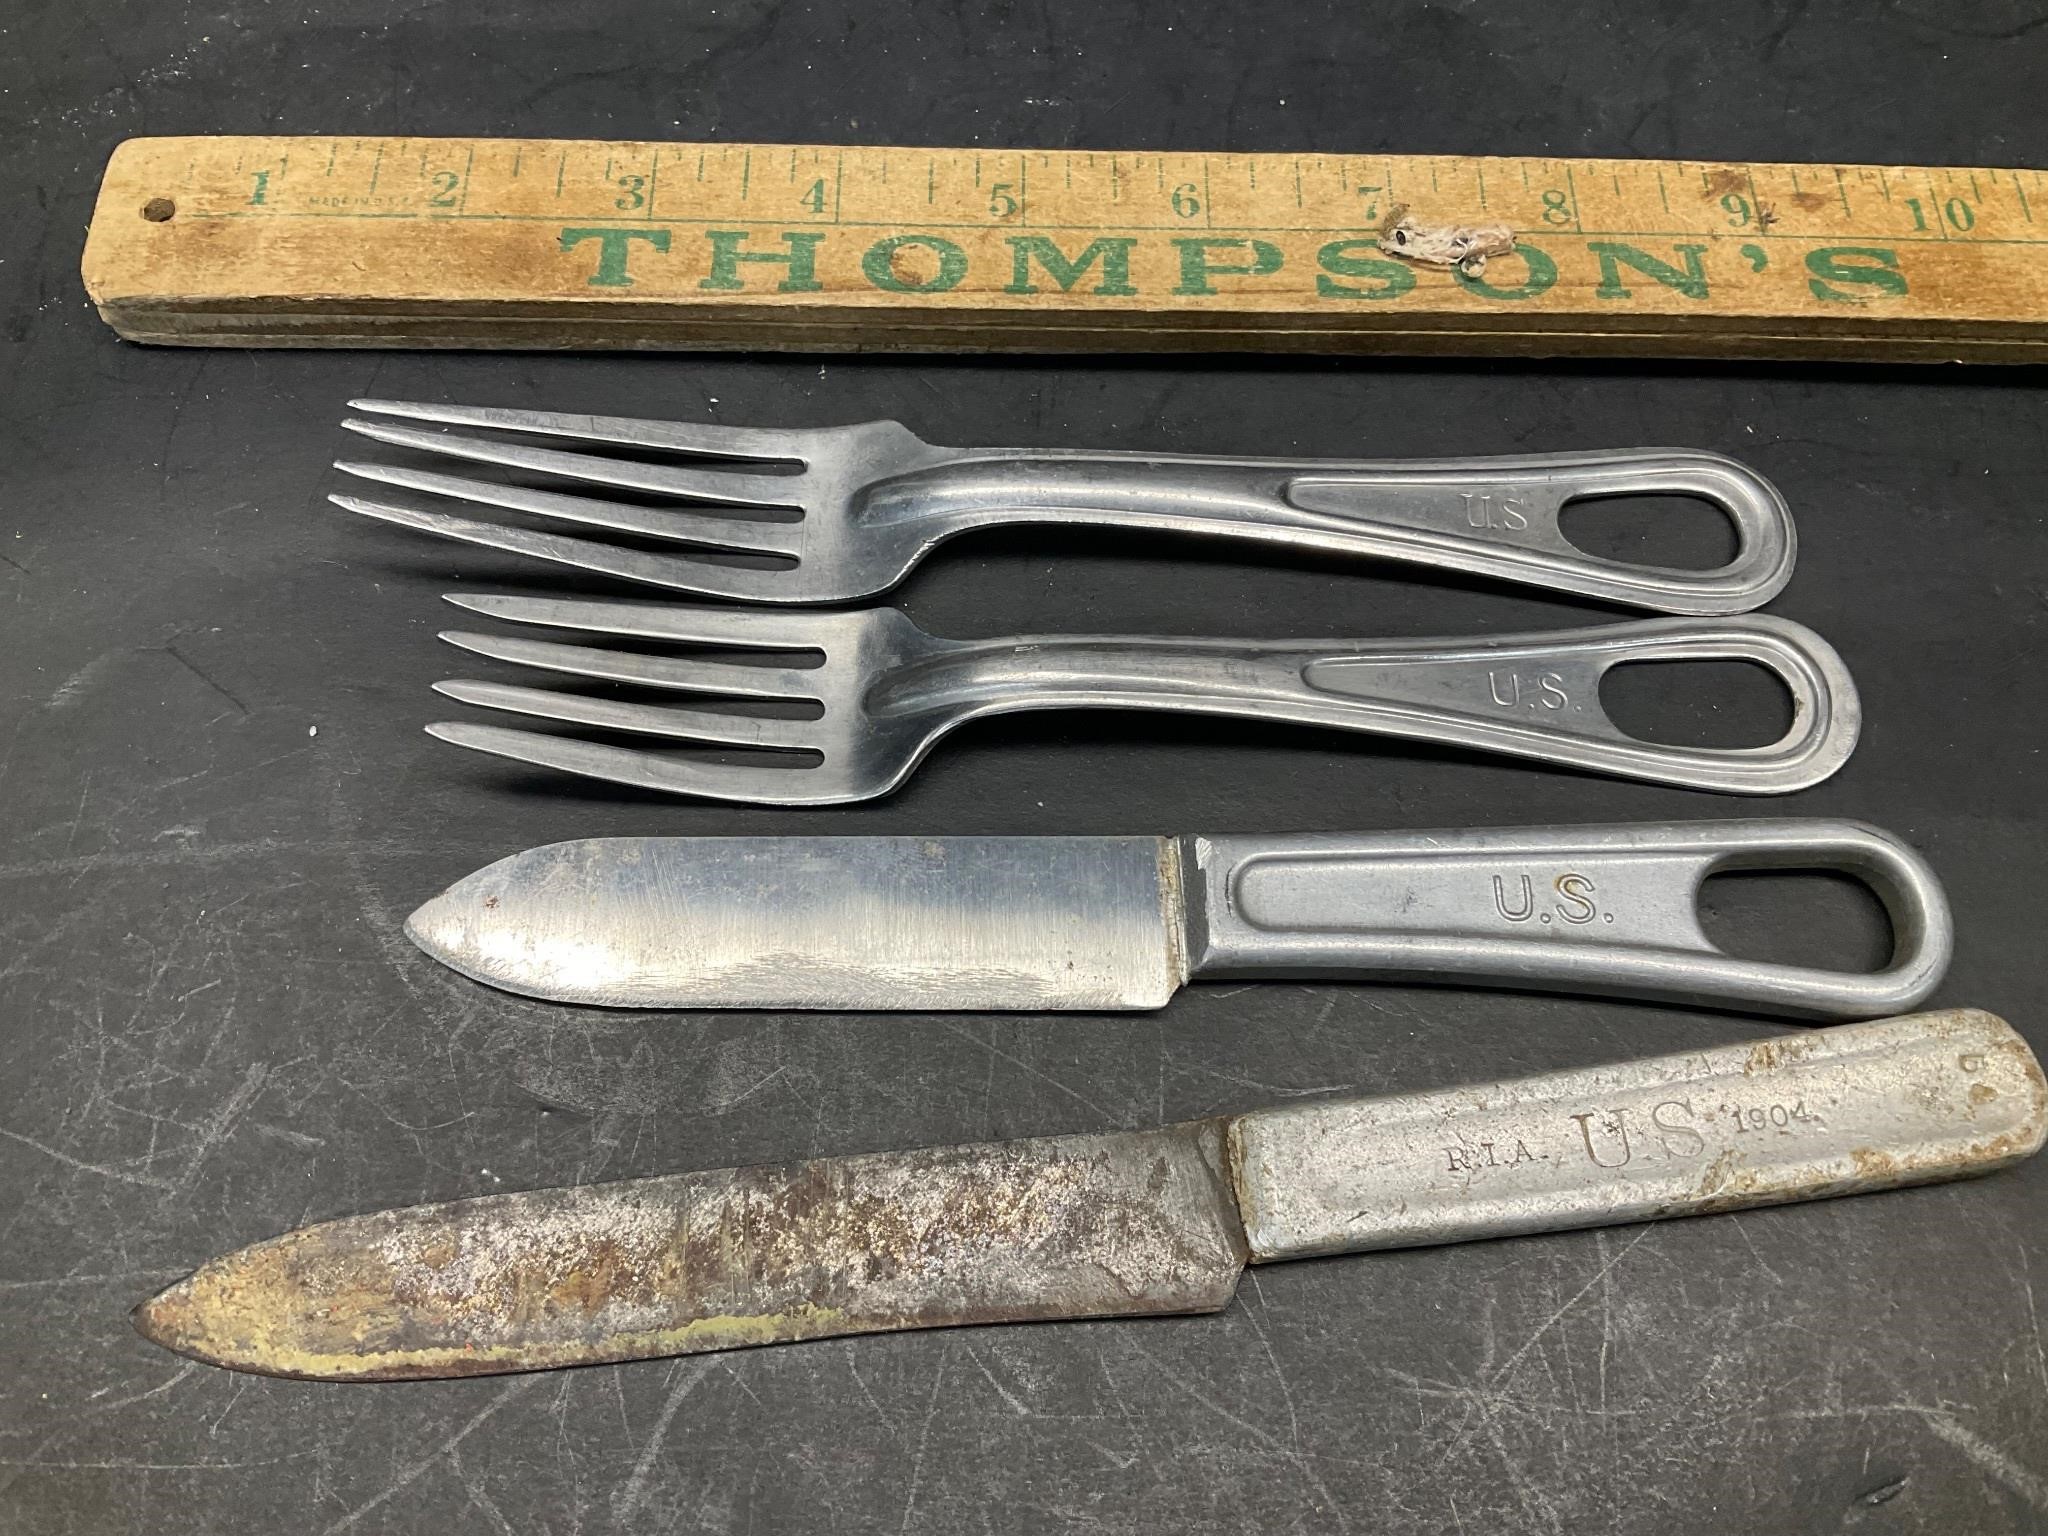 US military knives and forks